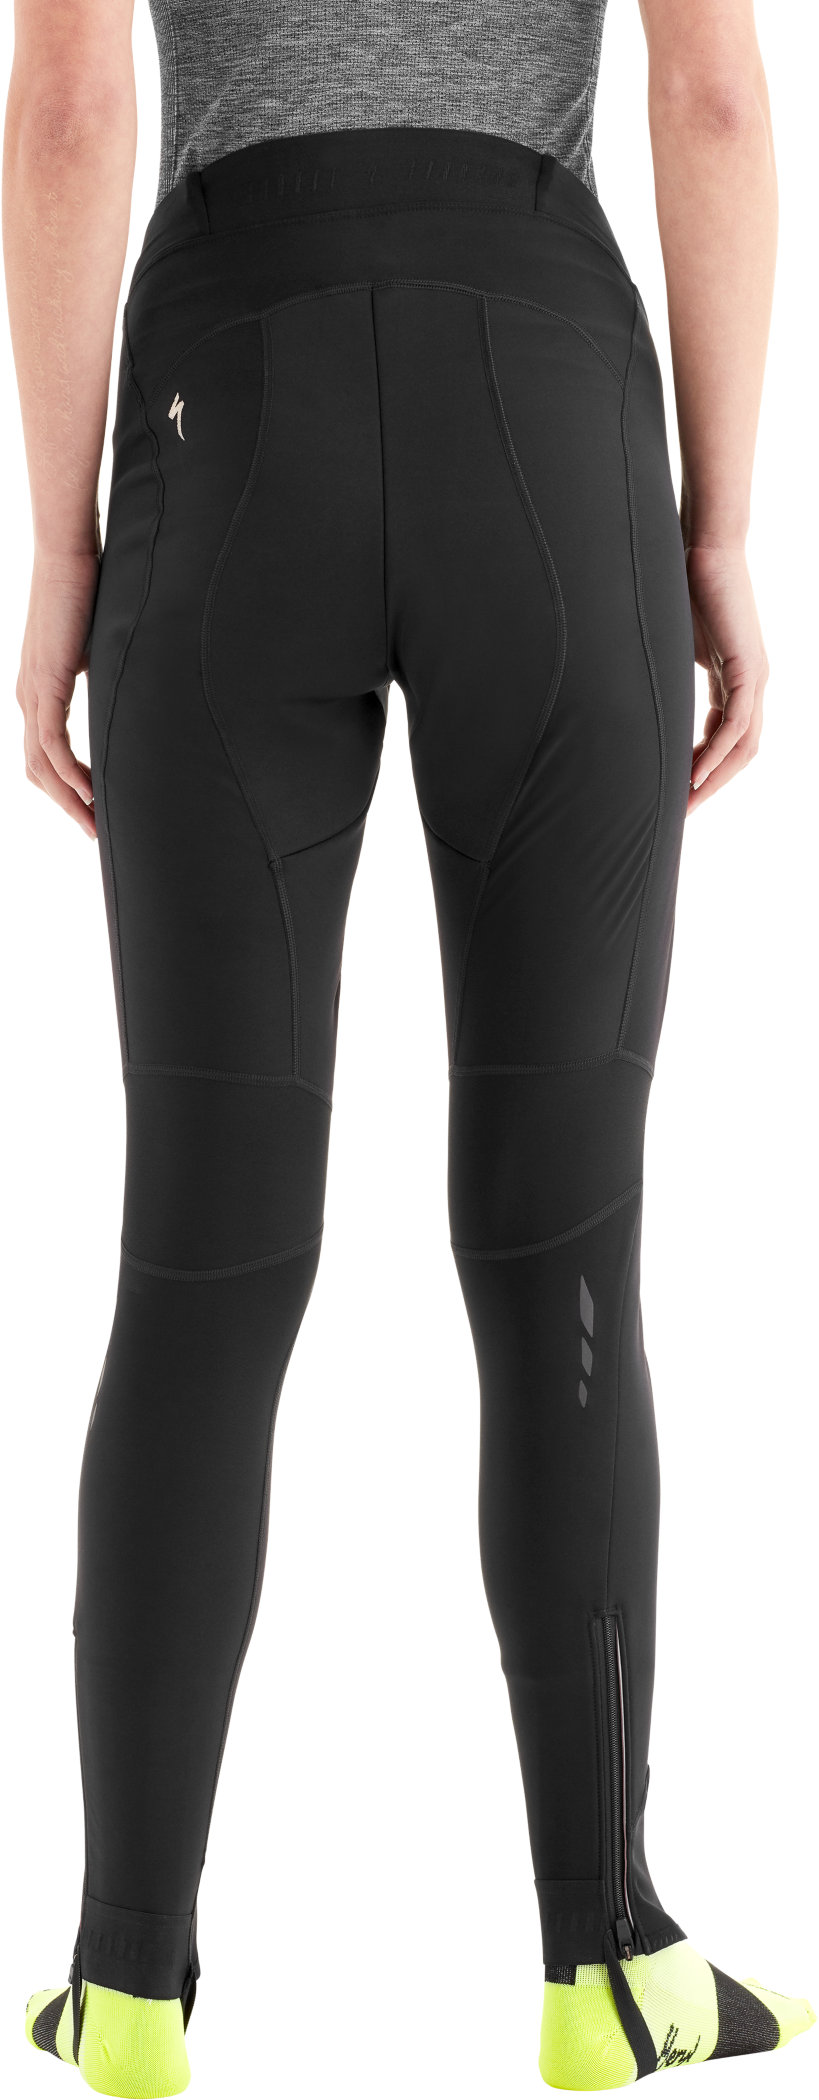 specialized element tights